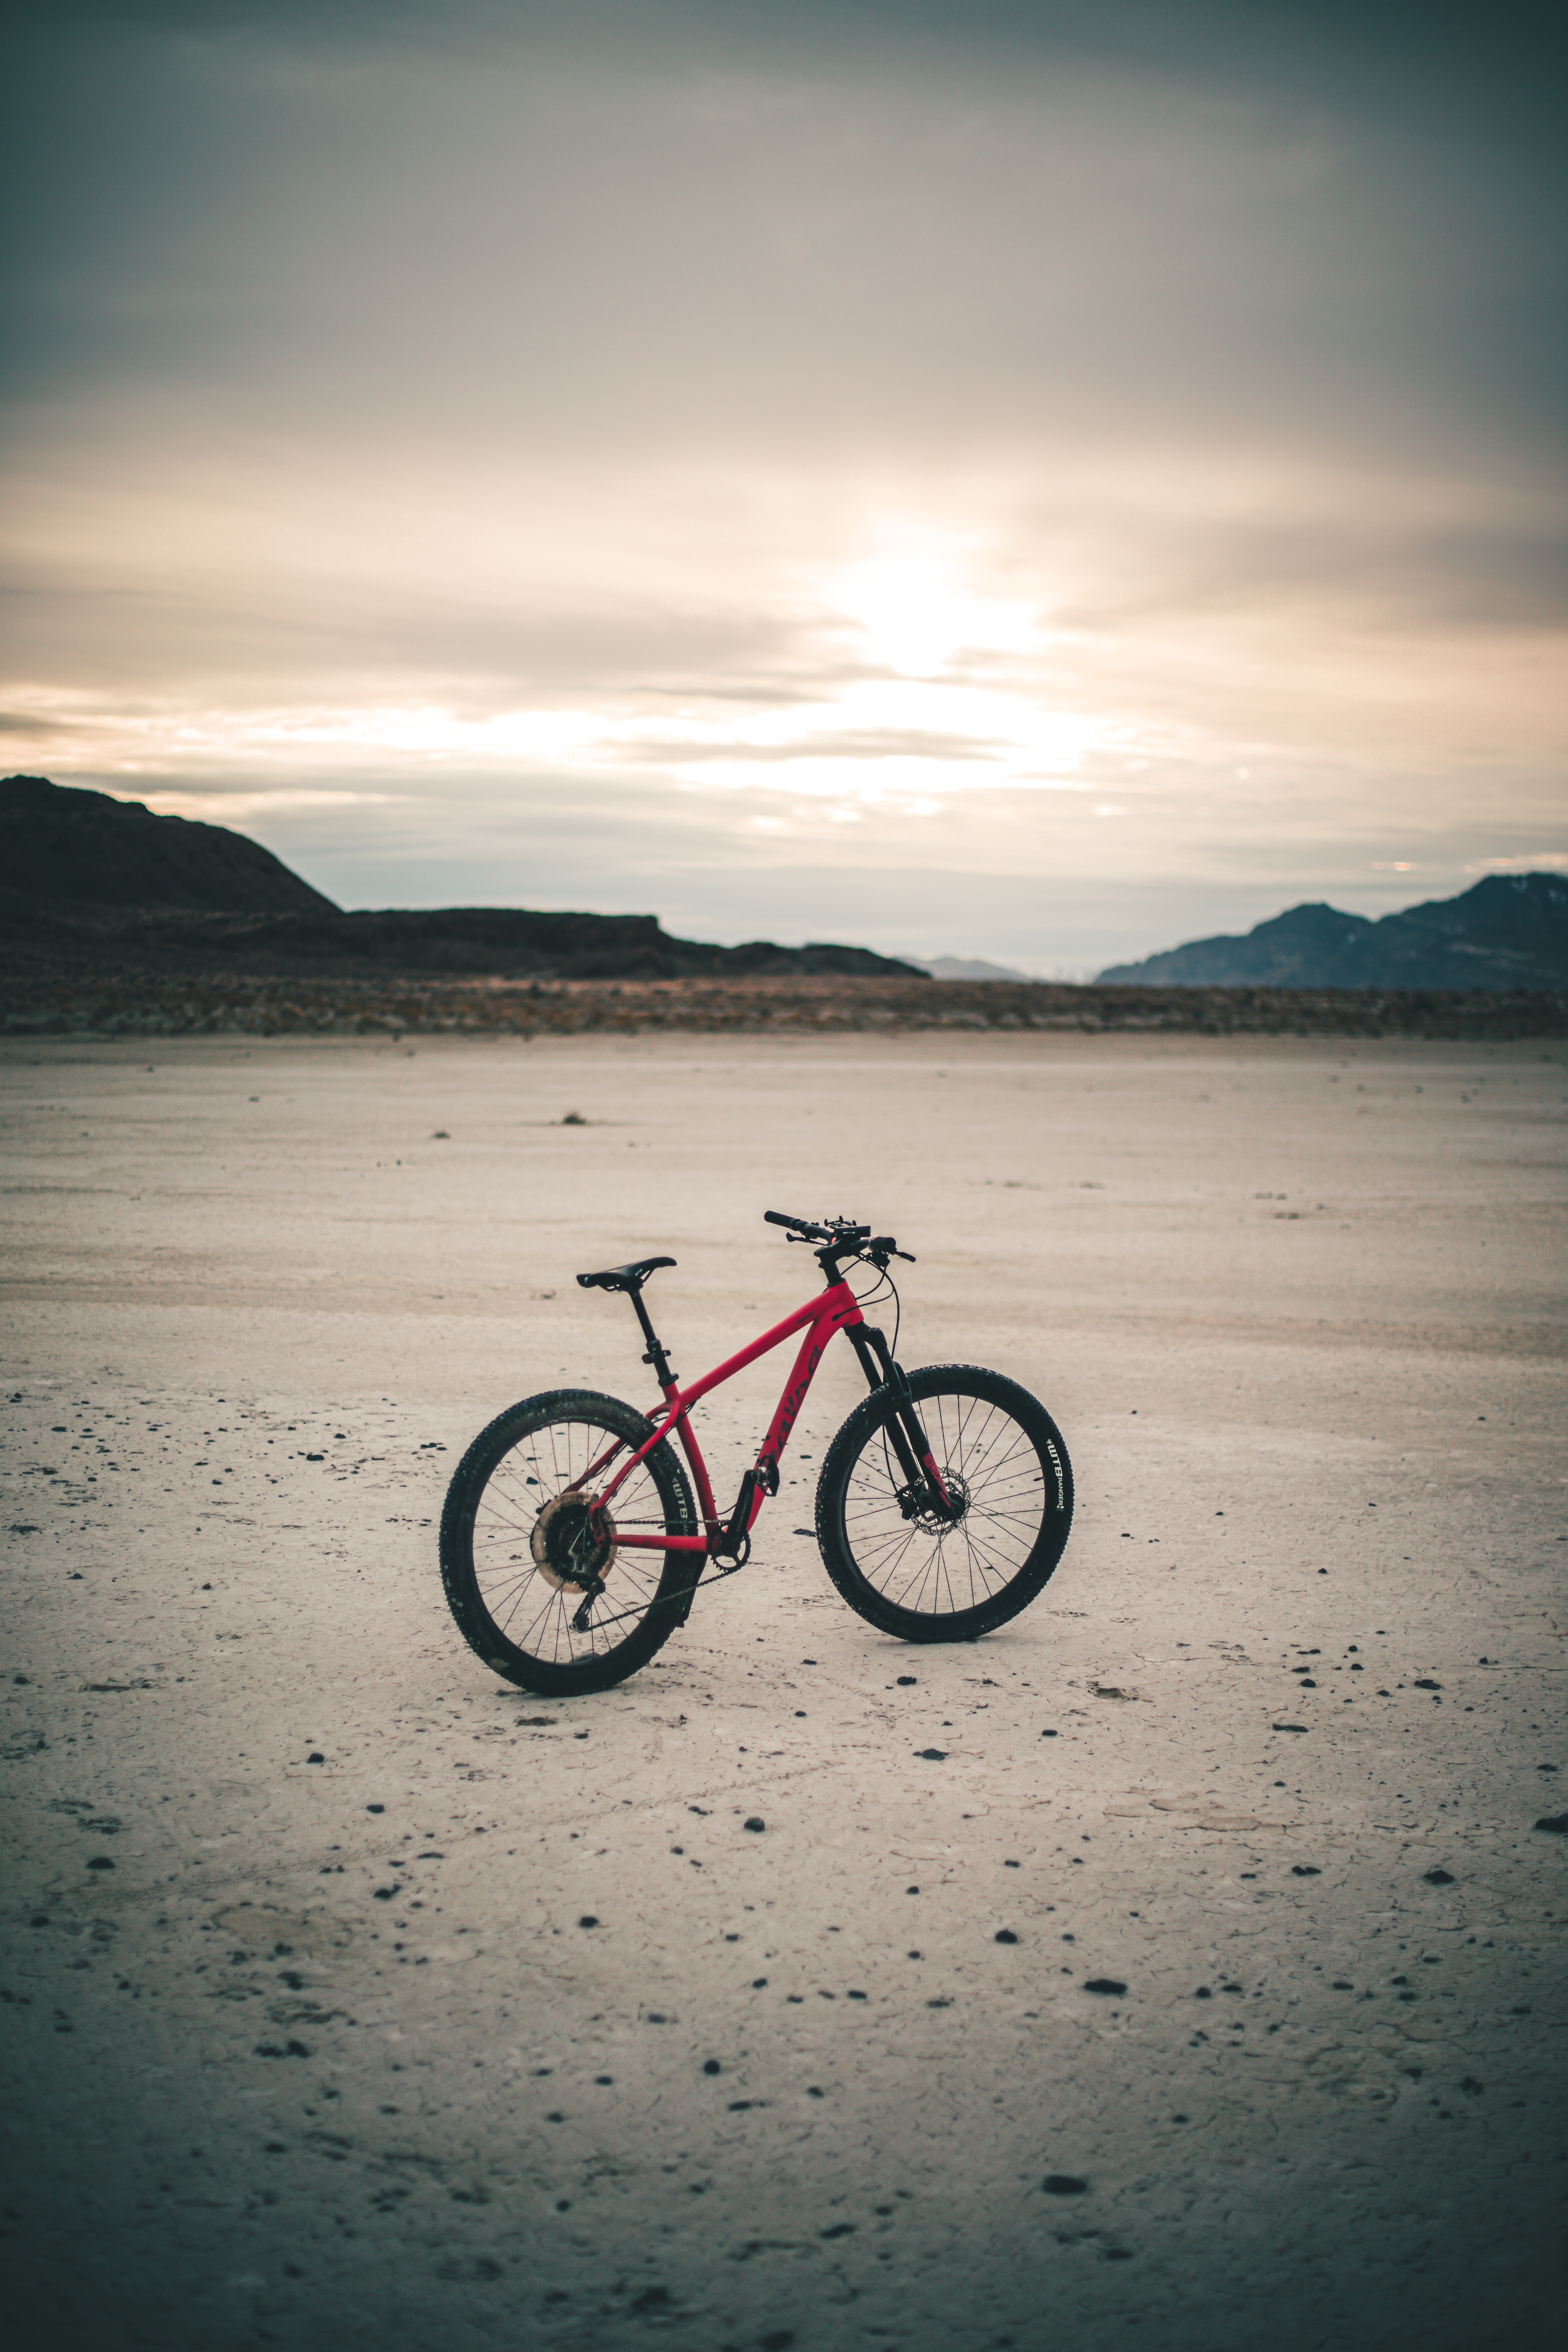 Mobile wallpaper: Mtb, Miscellaneous, Miscellanea, Bicycle, Bike, Beach,  152885 download the picture for free.